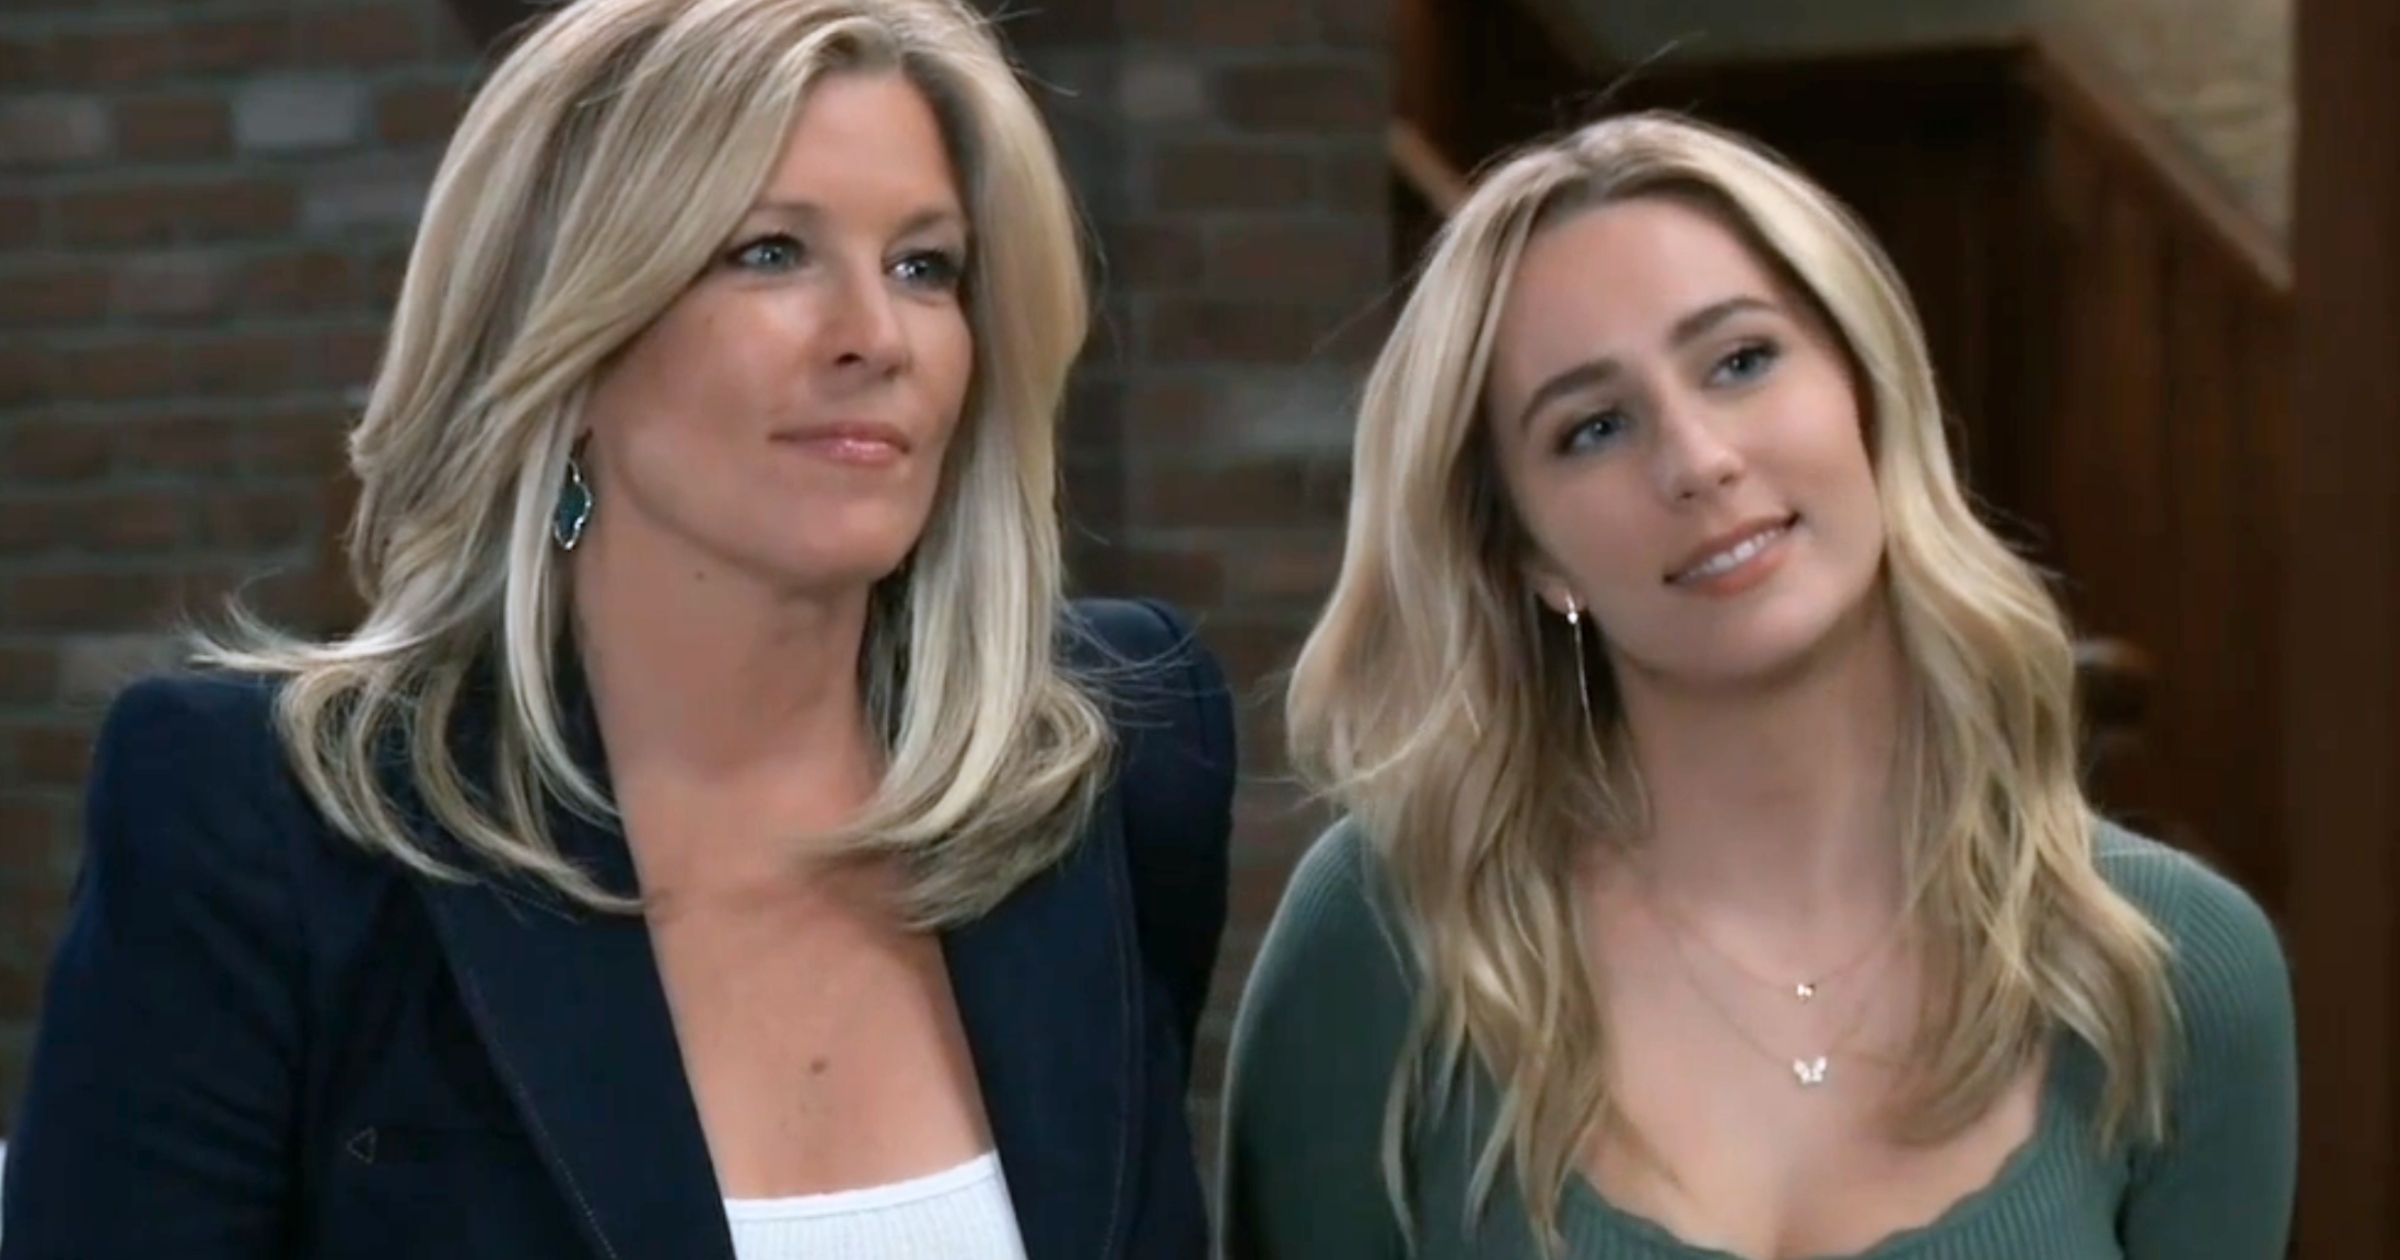 General Hospital - Oct 26 - Carly and Josslyn